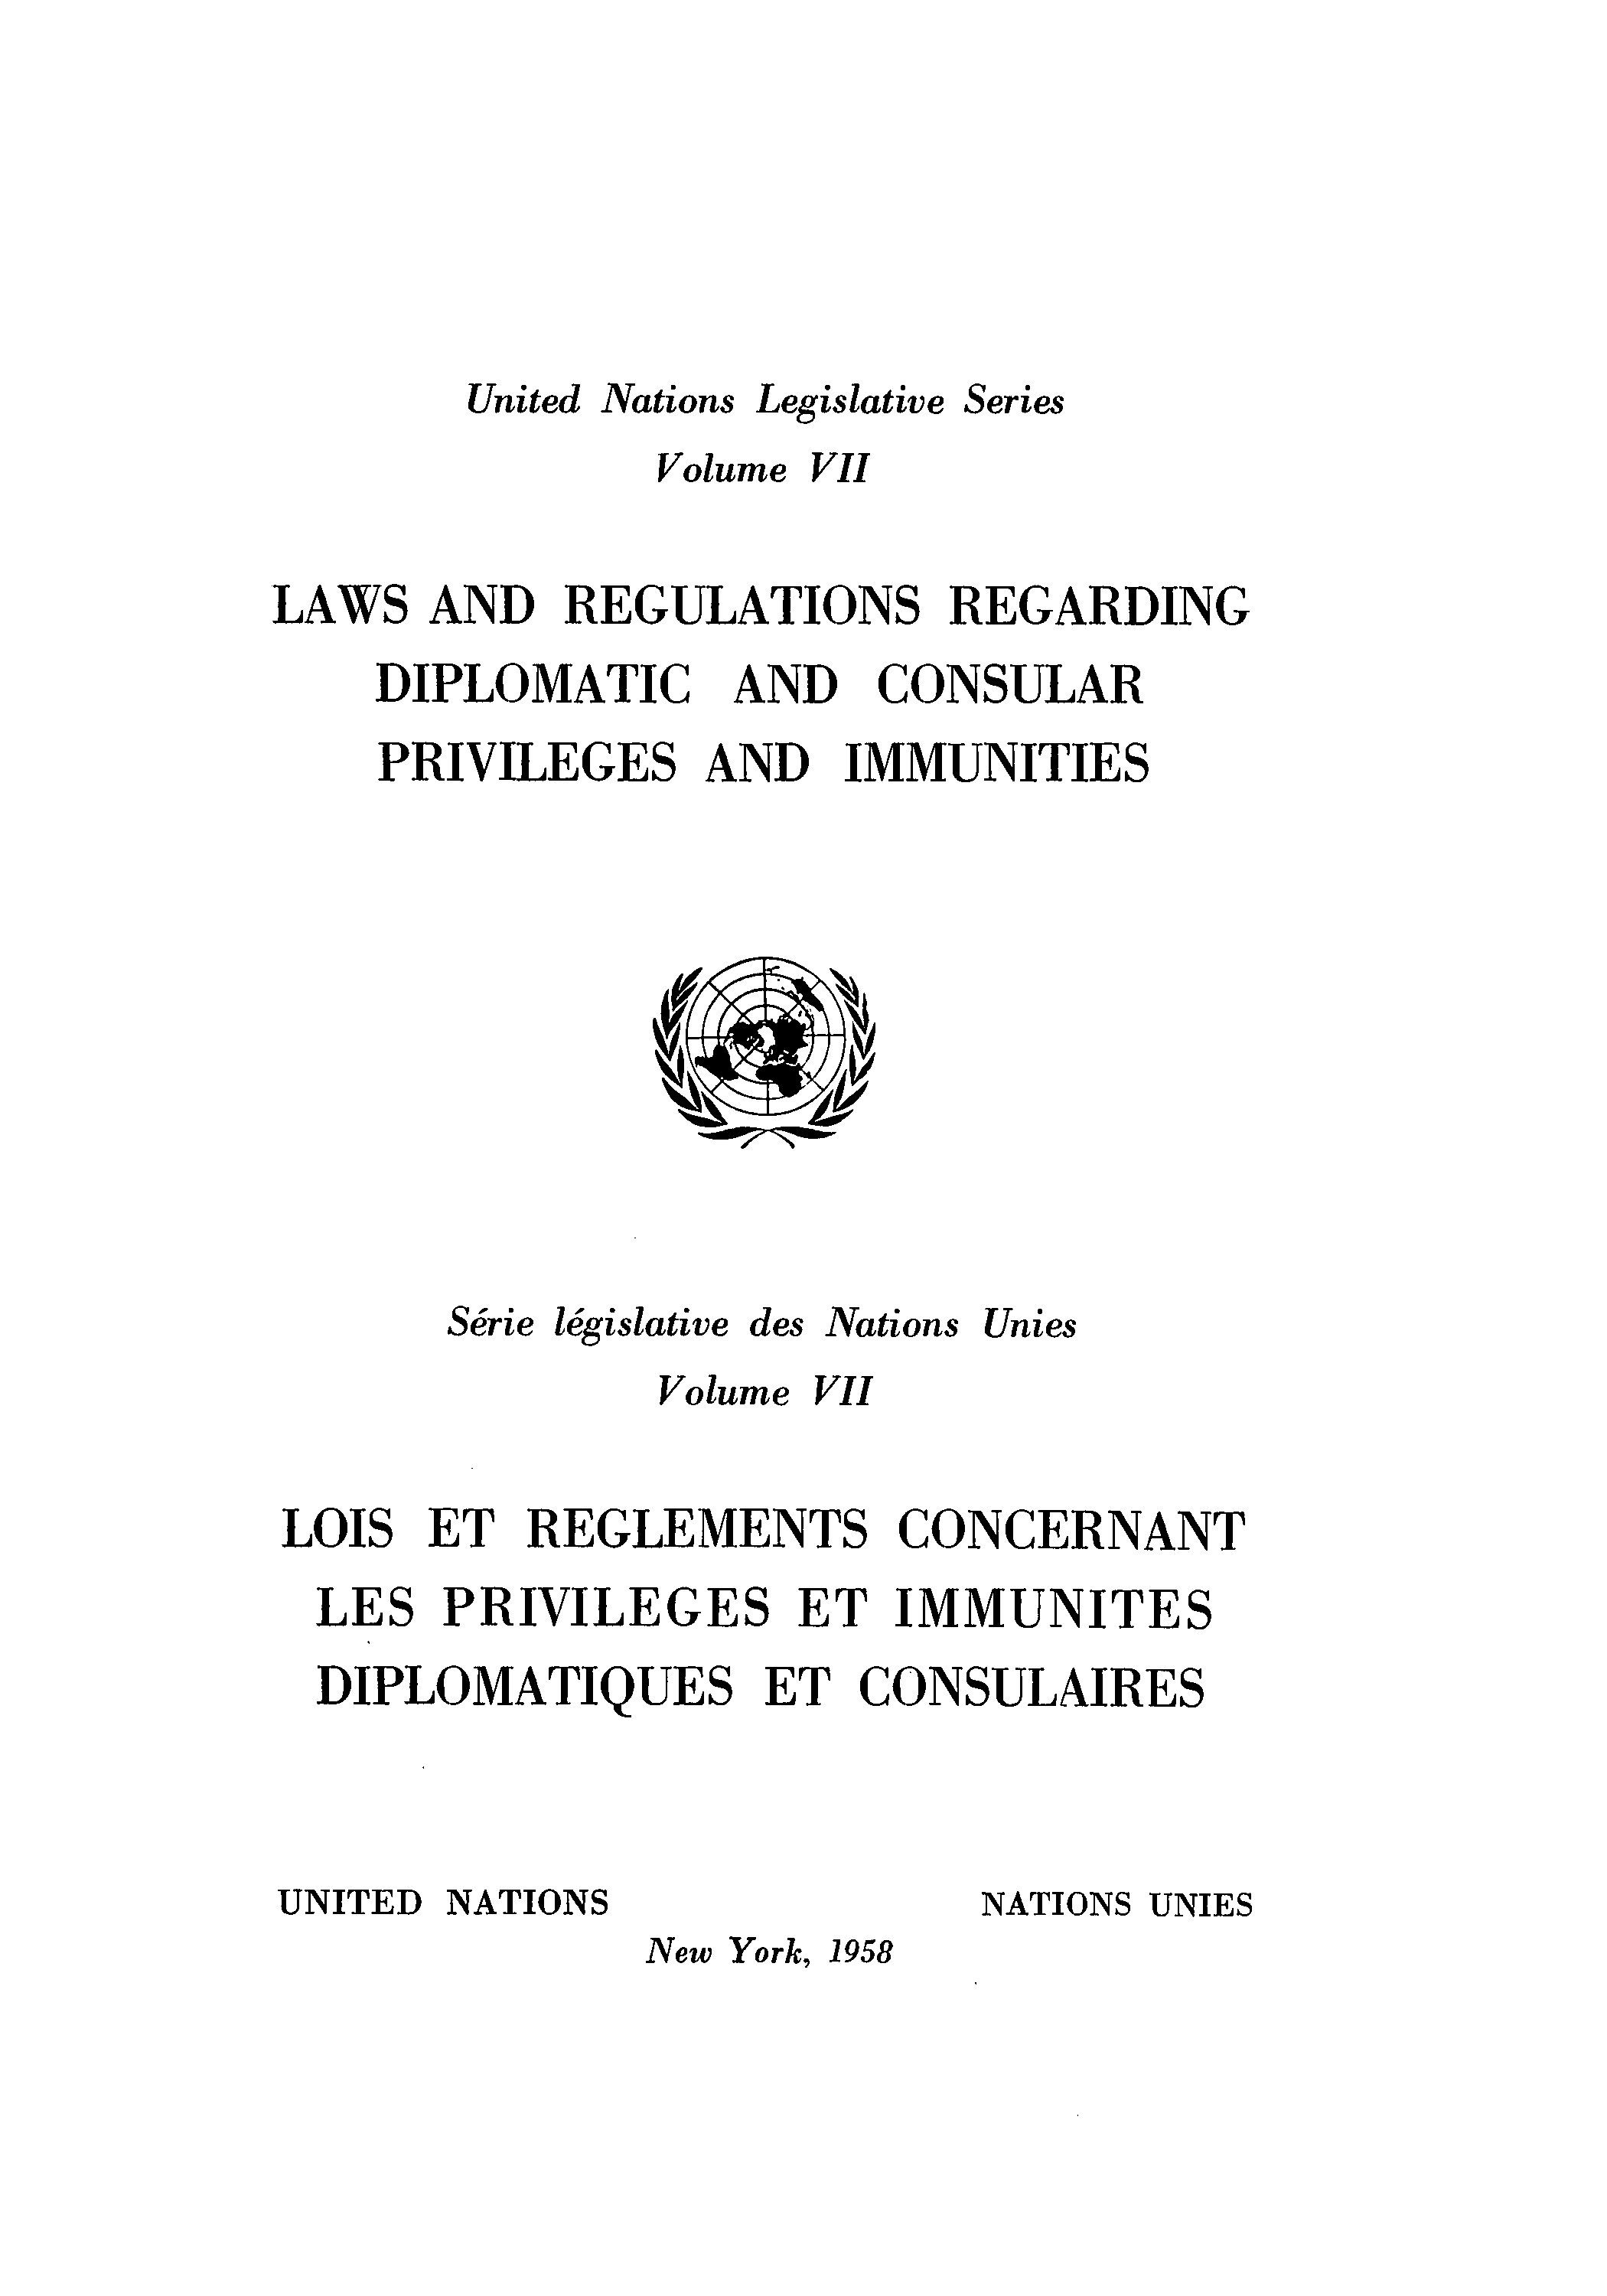 image of Laws and Regulations Regarding Diplomatic and Consular Privileges and Immunities